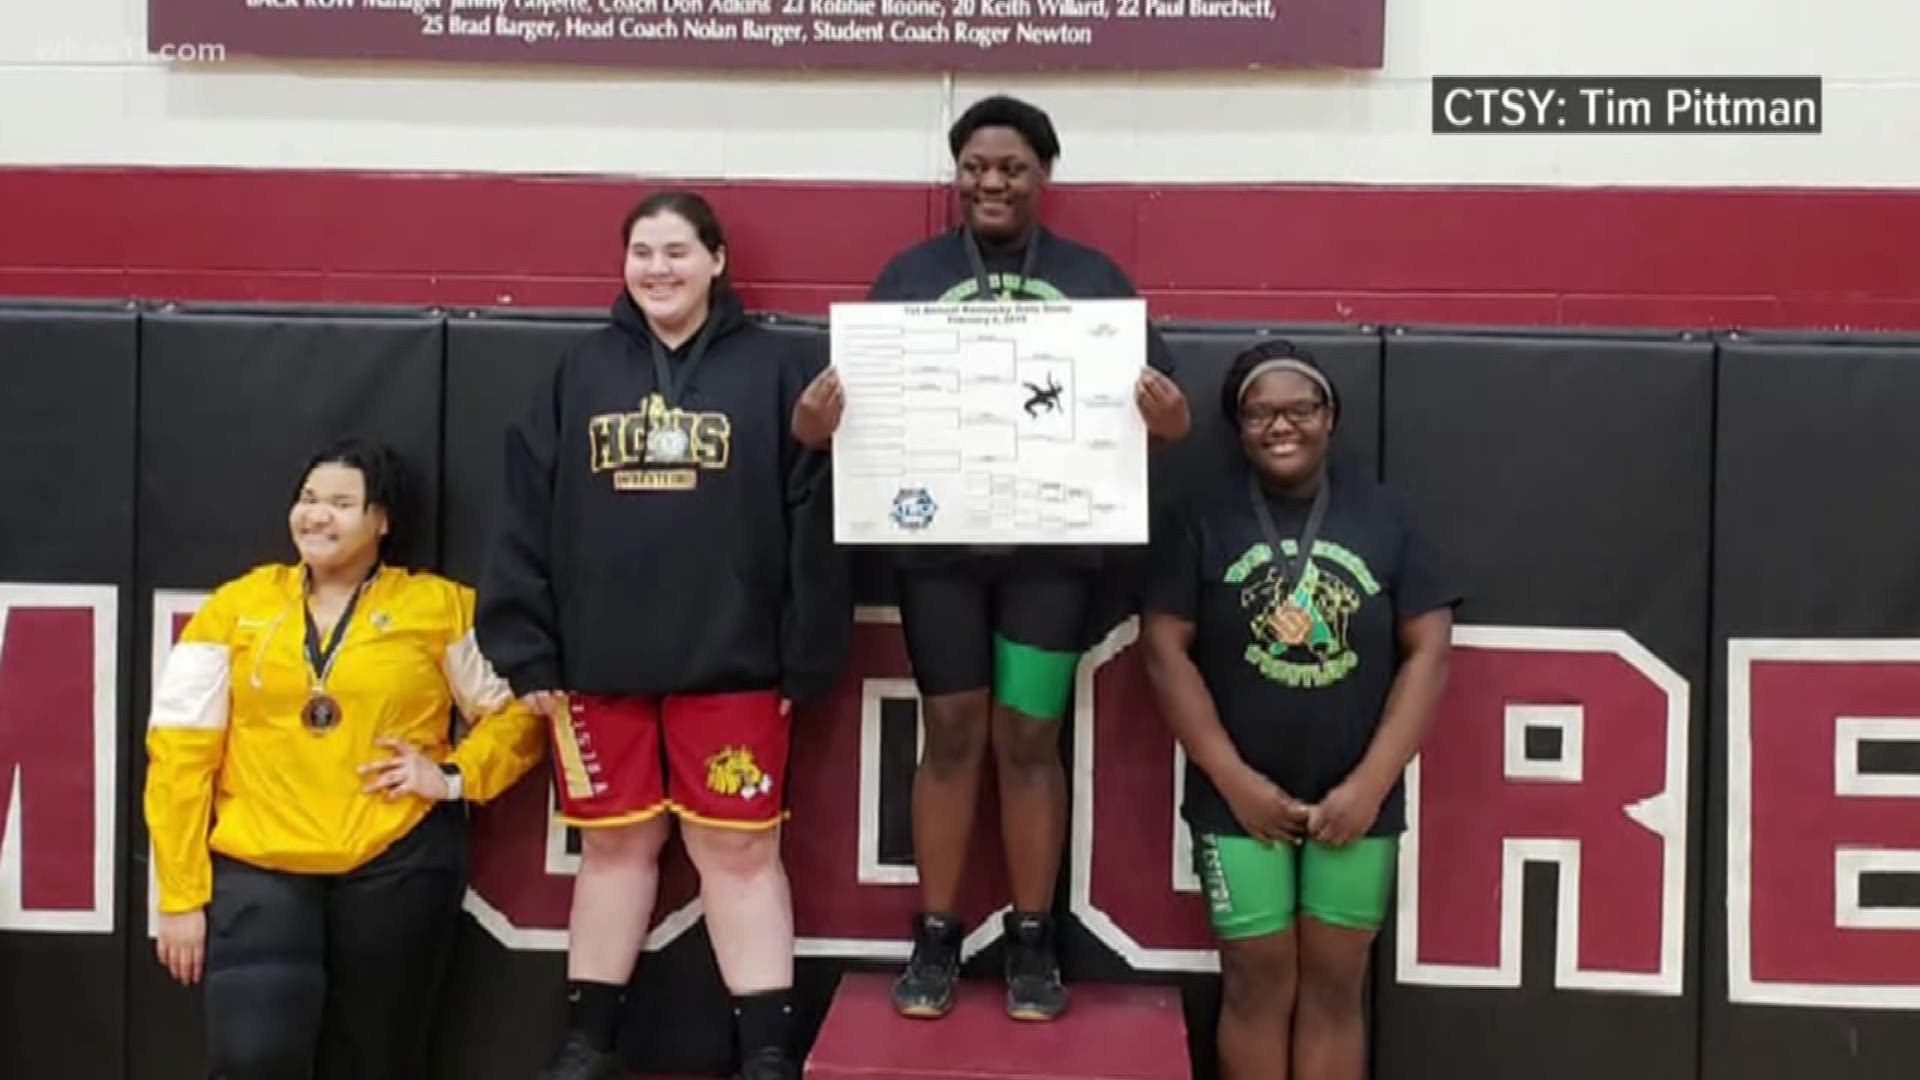 Malasha Lokey had never competed in wrestling before this school year. Now, she's a champion.